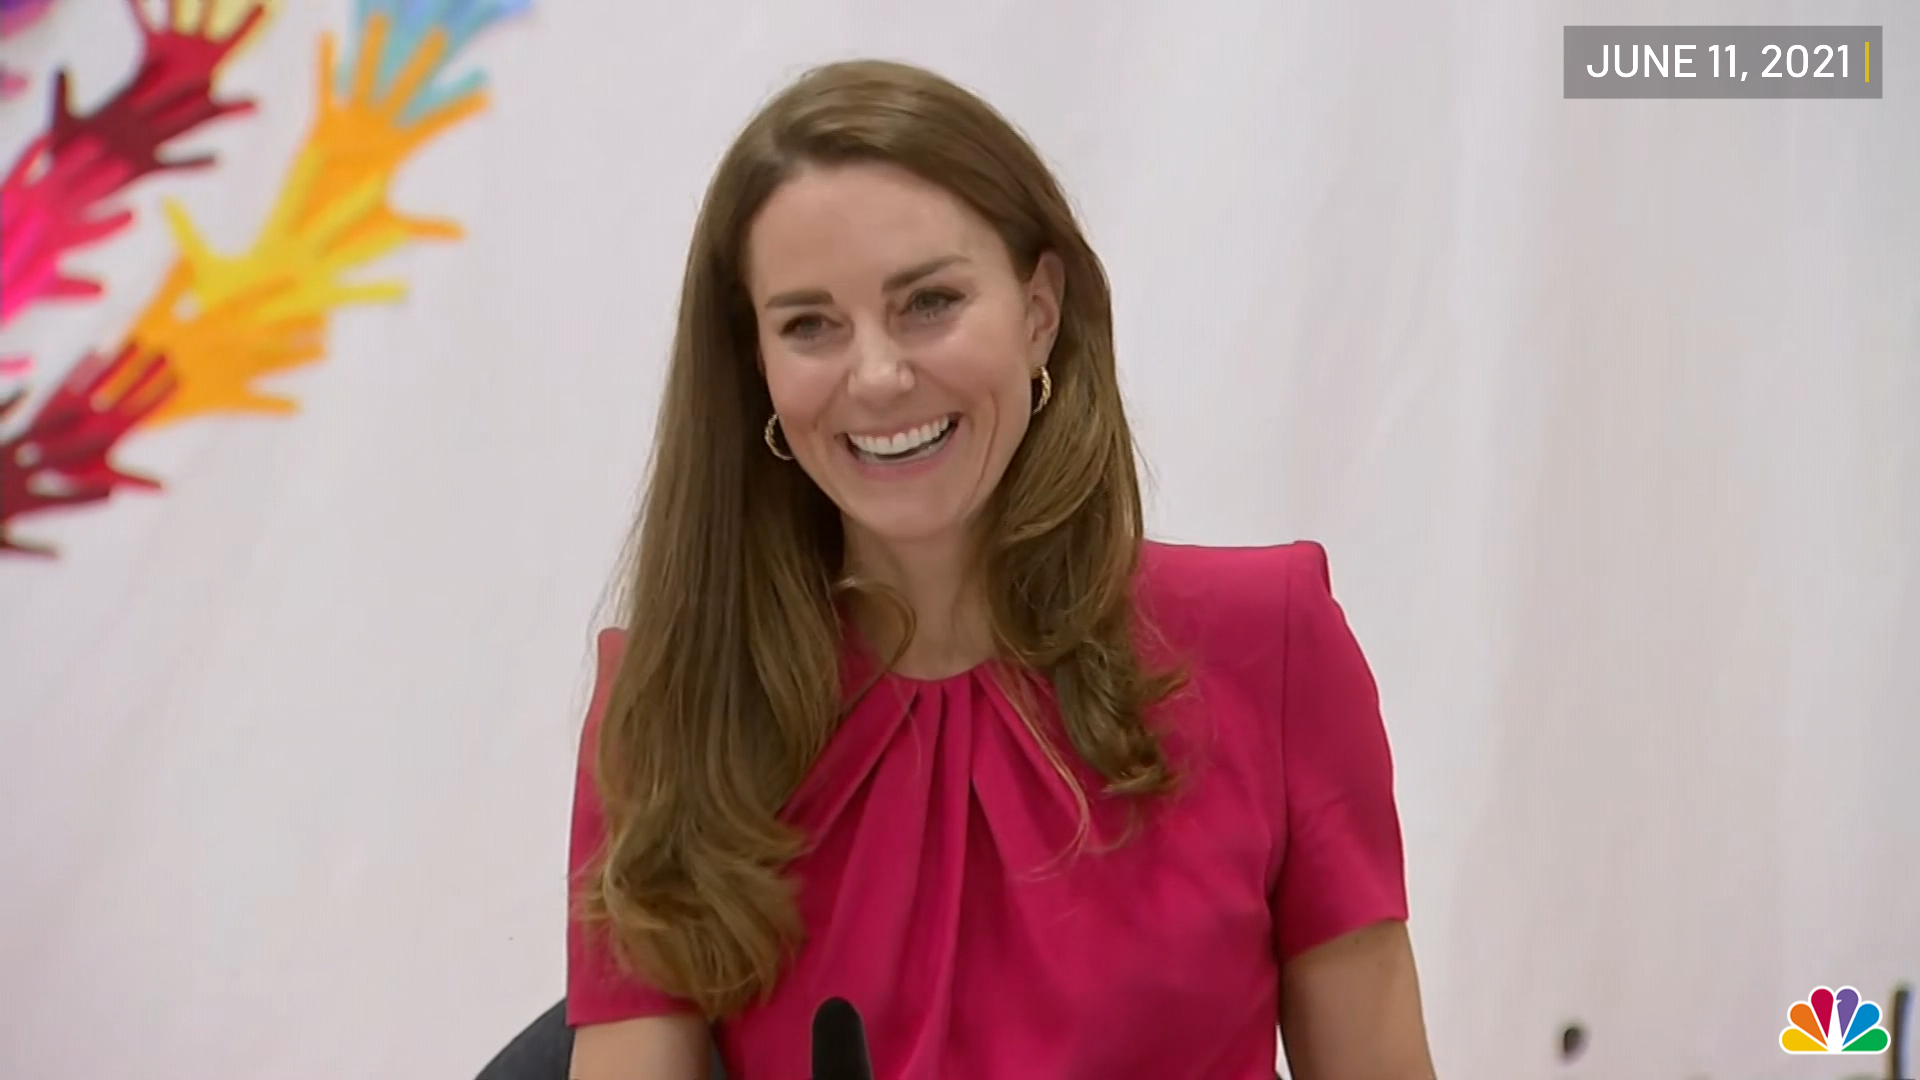 Kate Middleton on Birth of Niece: 'I Can't Wait to Meet Her' – NBC Bay Area